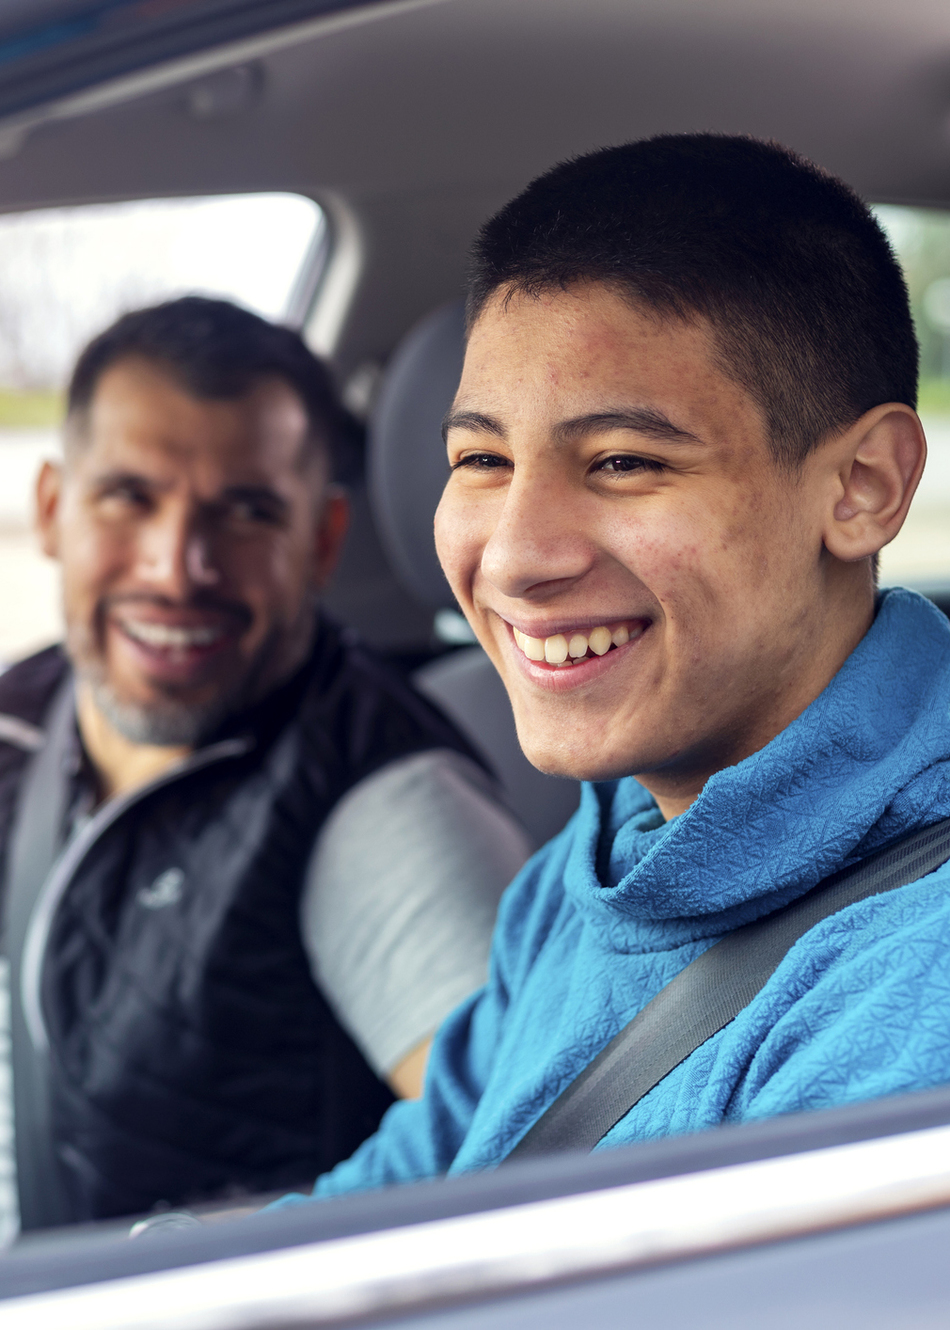 What to Expect When Your Son Reaches Puberty